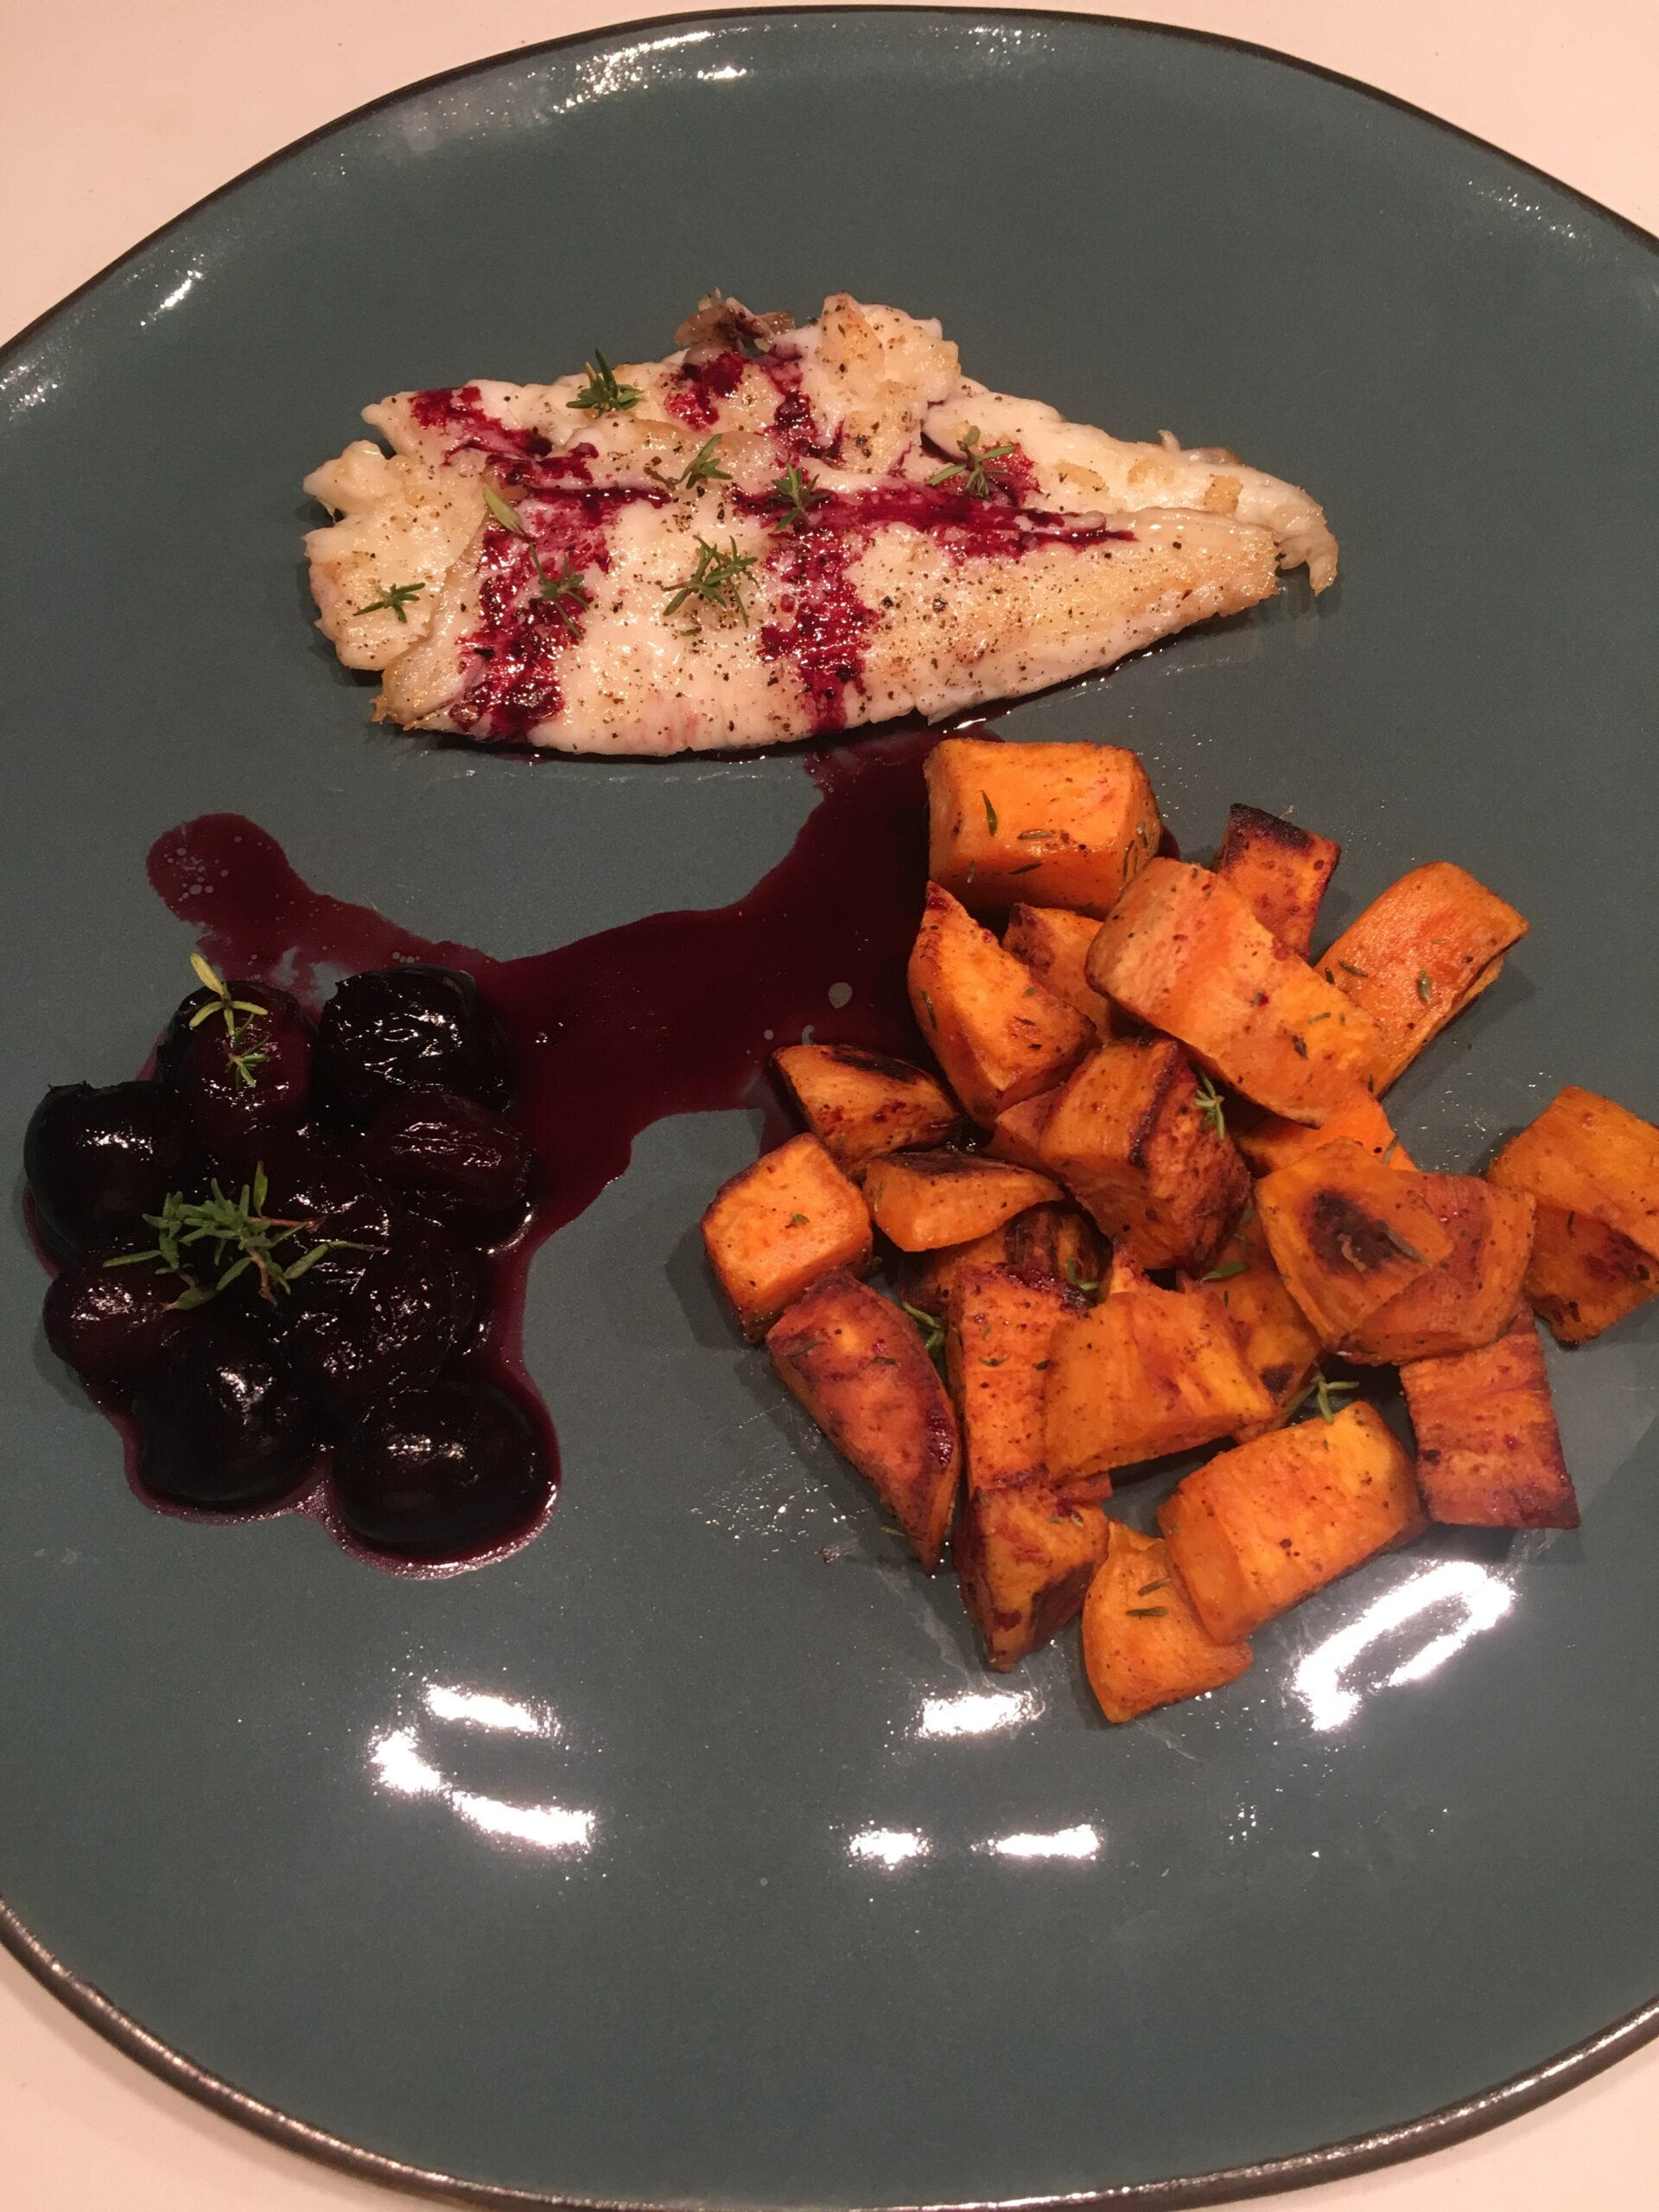 Pan-fried sea bream fillet with roasted sweet potatoes, cherries & thyme